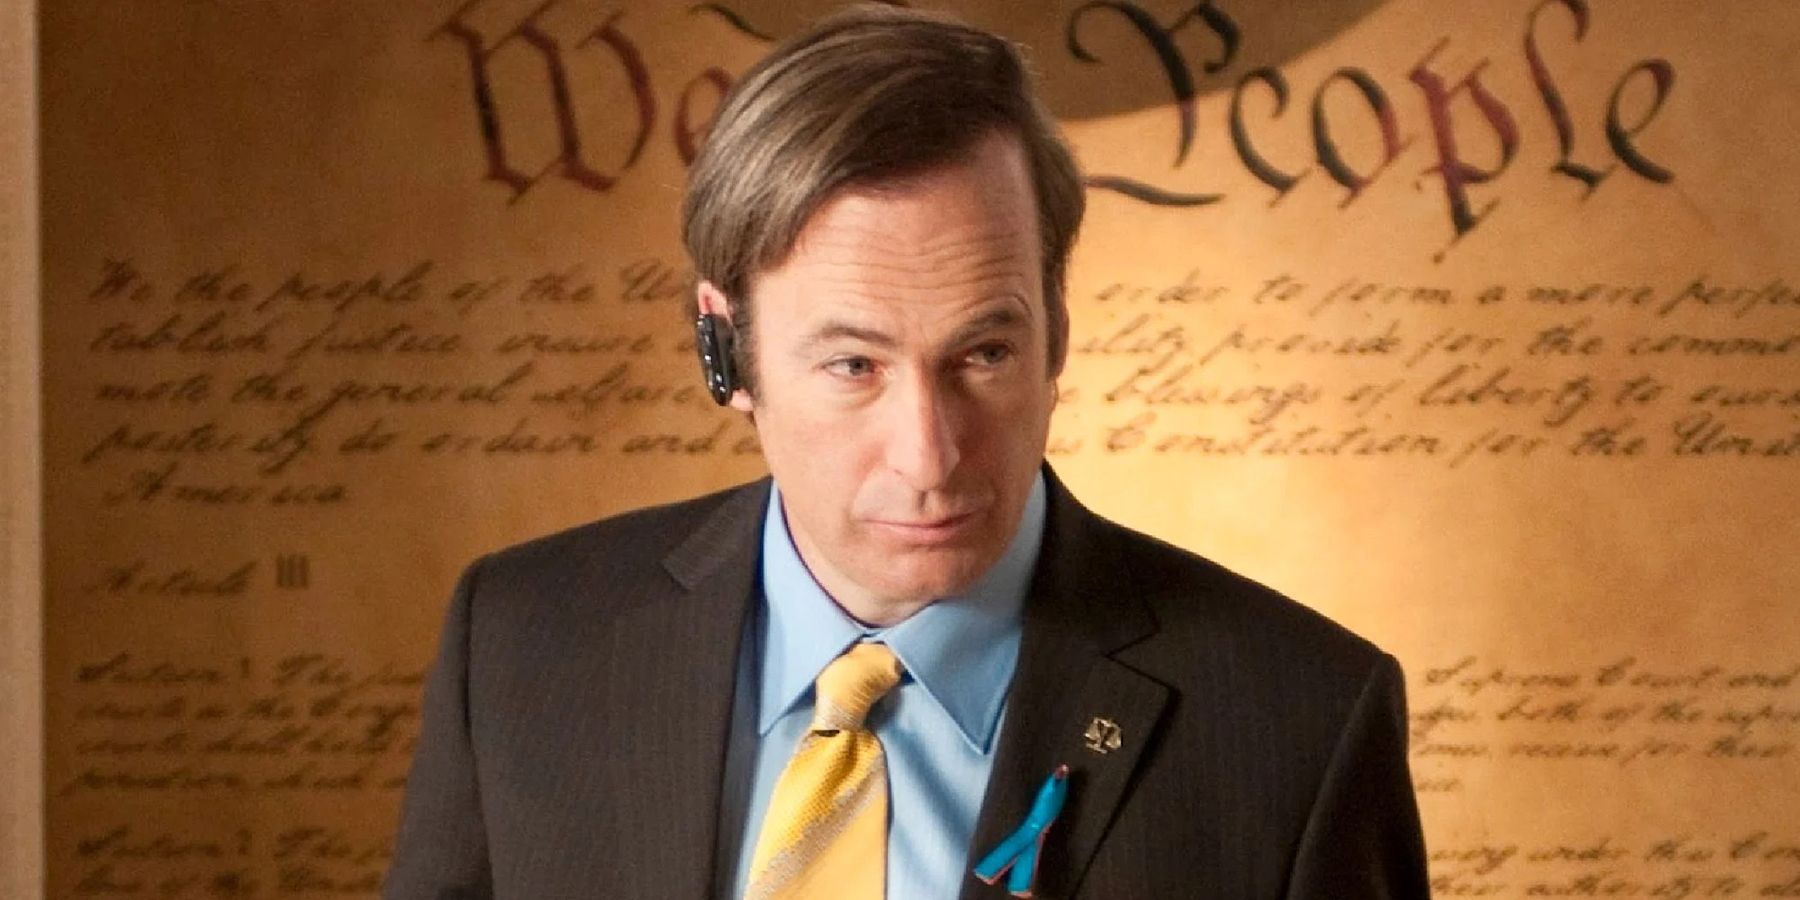 Fallout 76 Player Turns Themselves Into Saul Goodman